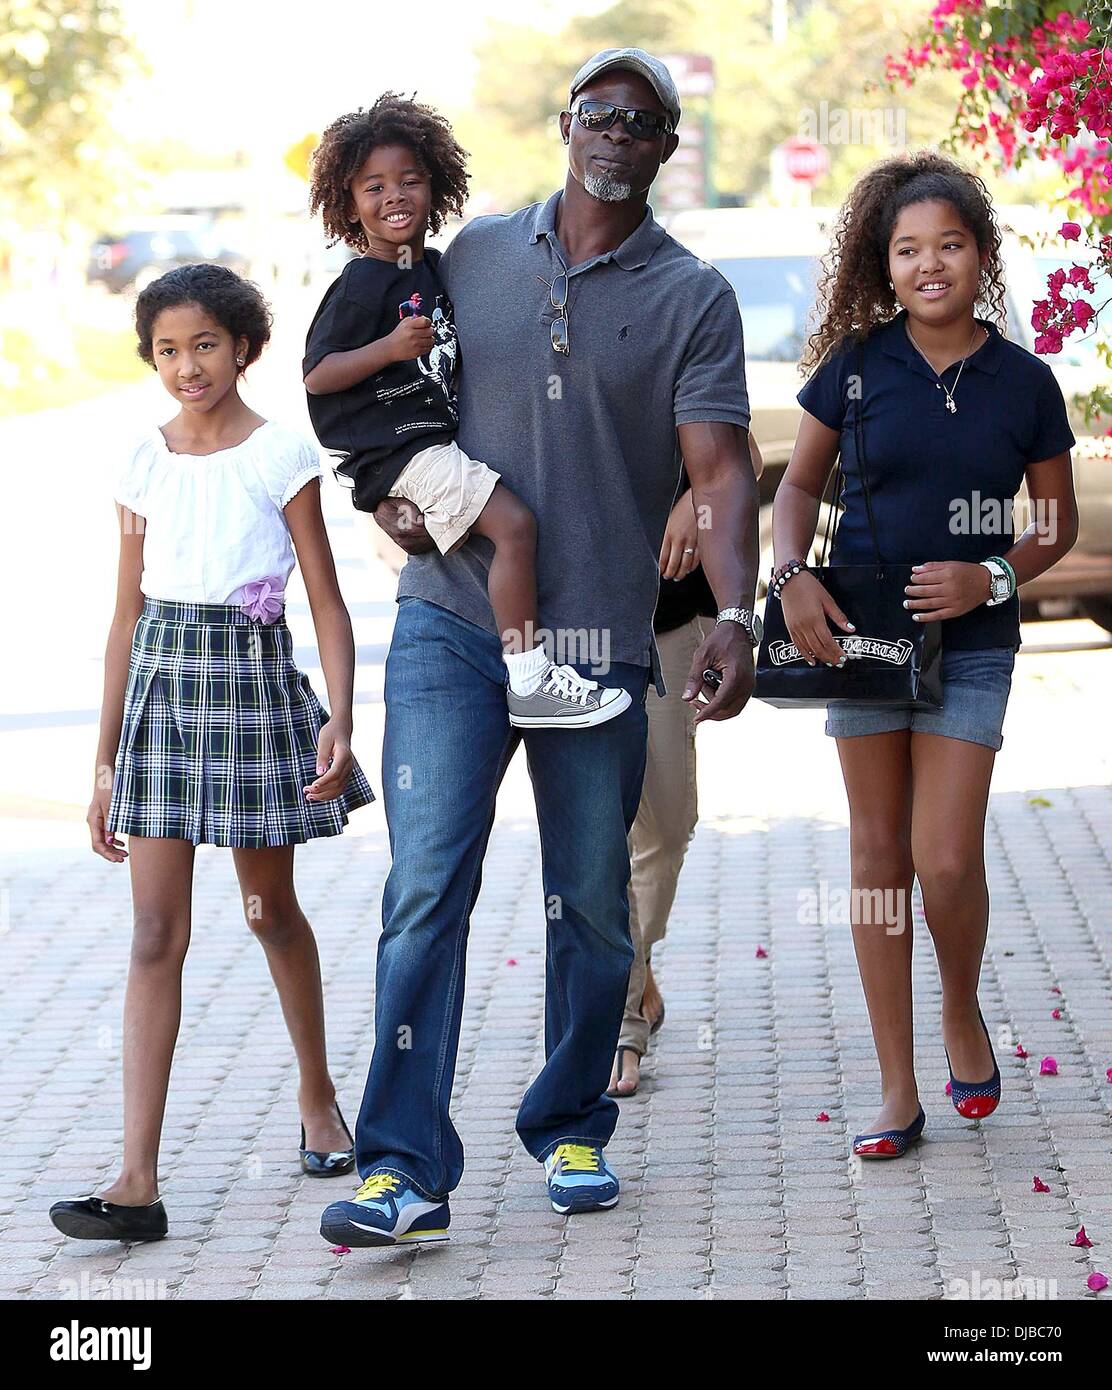 Kenzo Lee Hounsou, Djimon Hounsou, Ming Lee Simmons and Aoki Lee Simmons Djimon Hounsou at the Malibu Country Mart with his stepdaughters and son Los Angeles, California - 15.09.12 Stock Photo